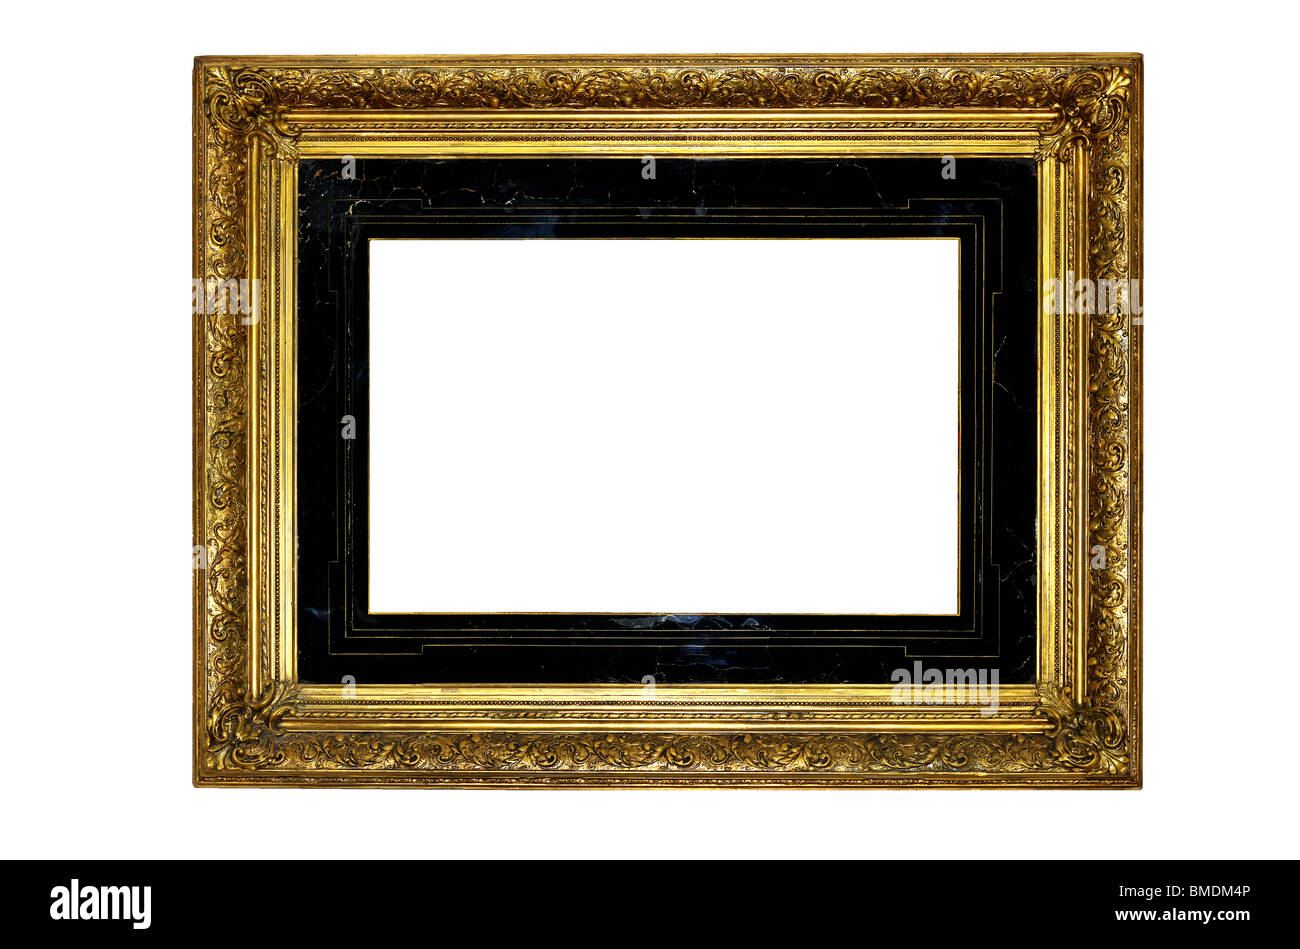 Gold picture frame in the Renaissance style. Stock Photo